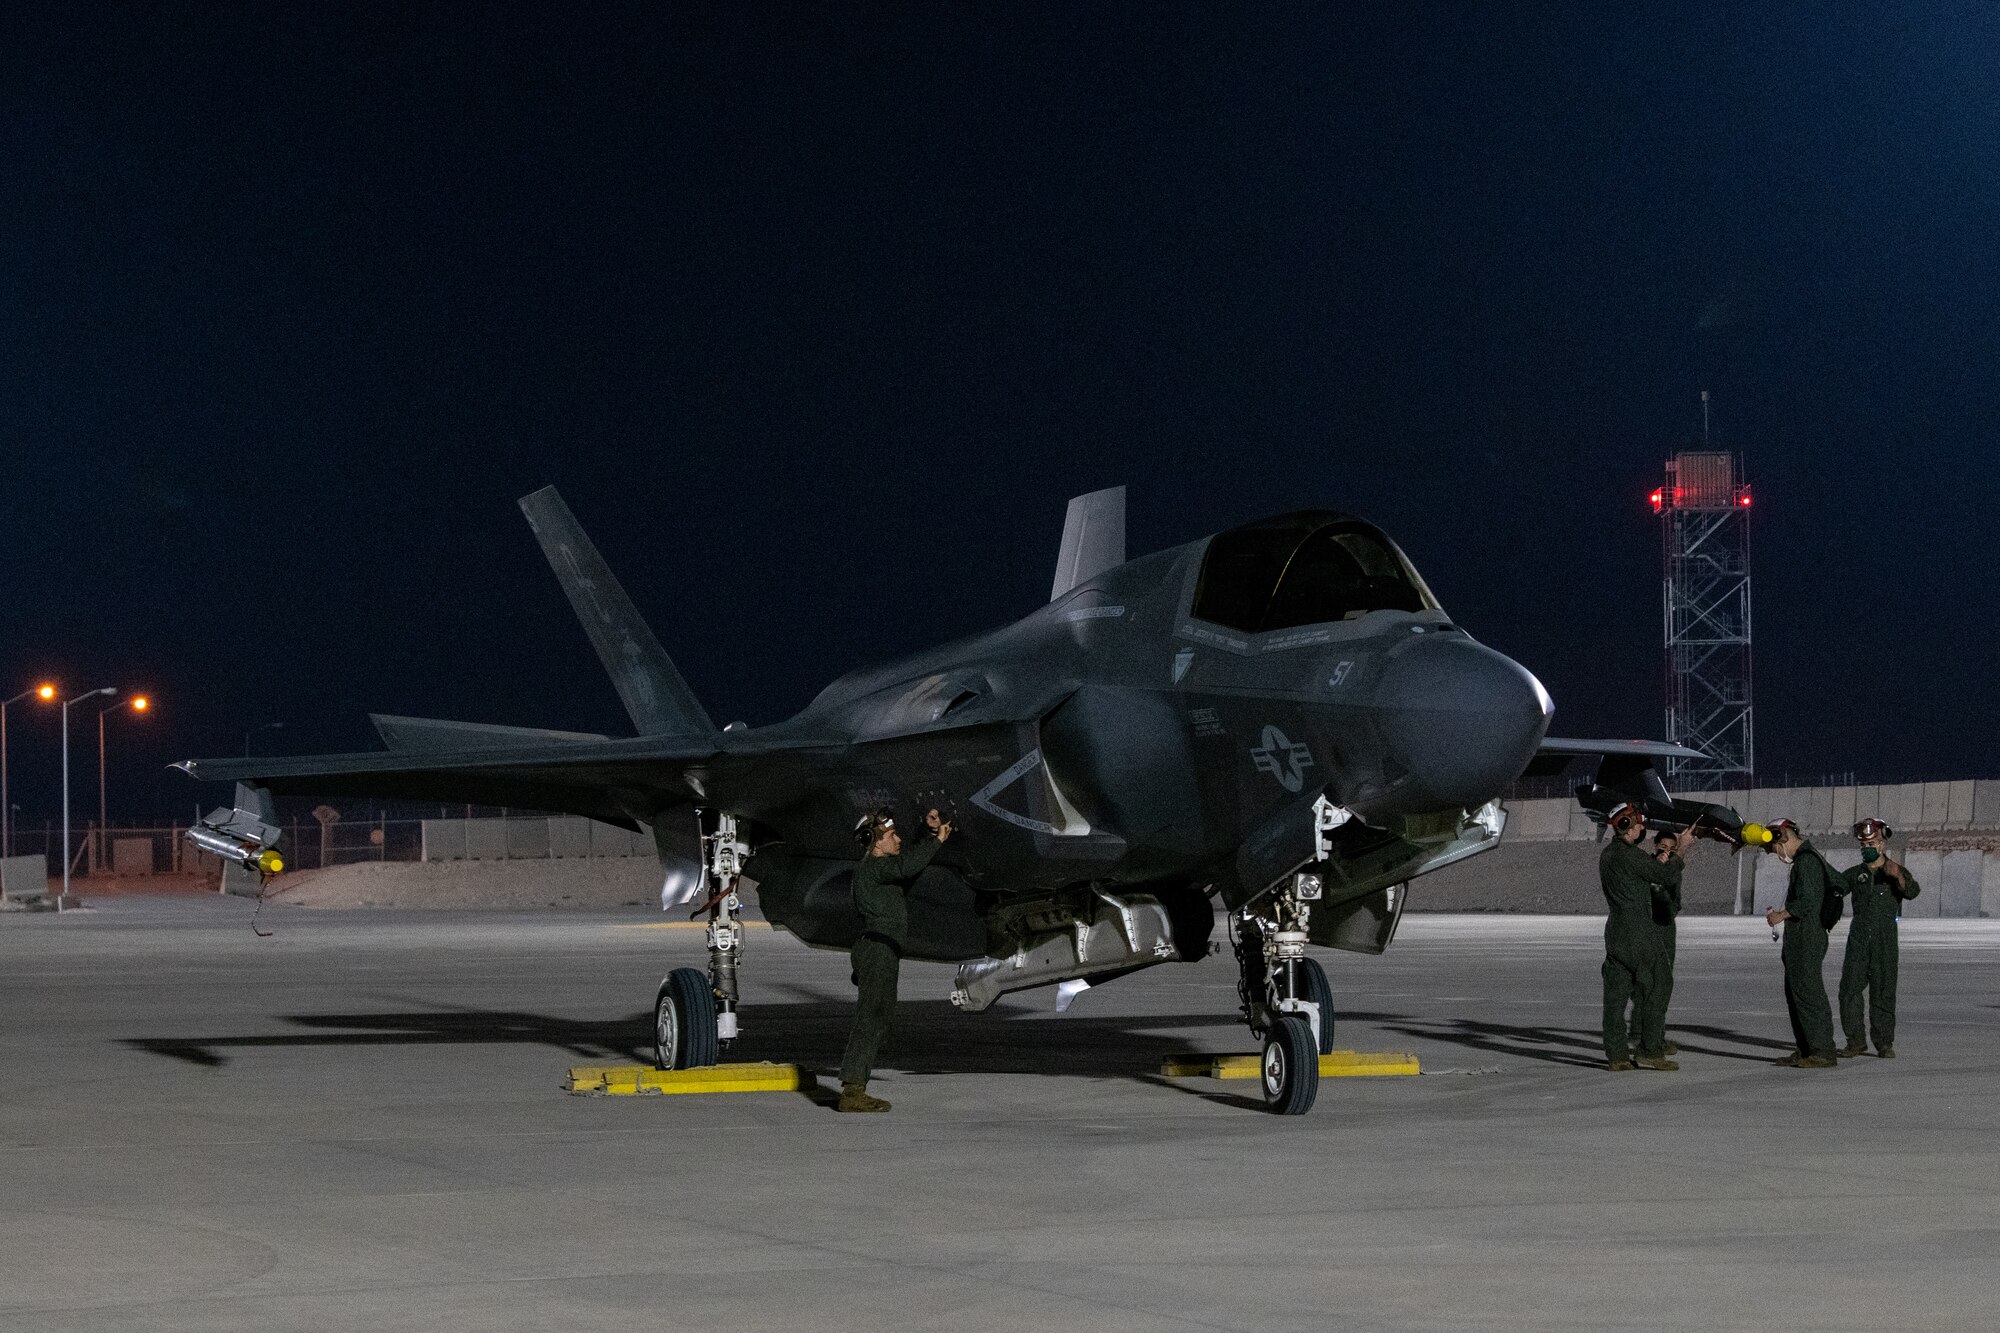 U.S. Marines prepare to launch an F-35B Lightning II aircraft, assigned to the Marine Medium Tiltrotor Squadron 164 (Reinforced), 15th Marine Expeditionary Unit, by conducting a foreign object debris clearance walk at Al Udeid Air Base, Qatar, March 3, 2021.